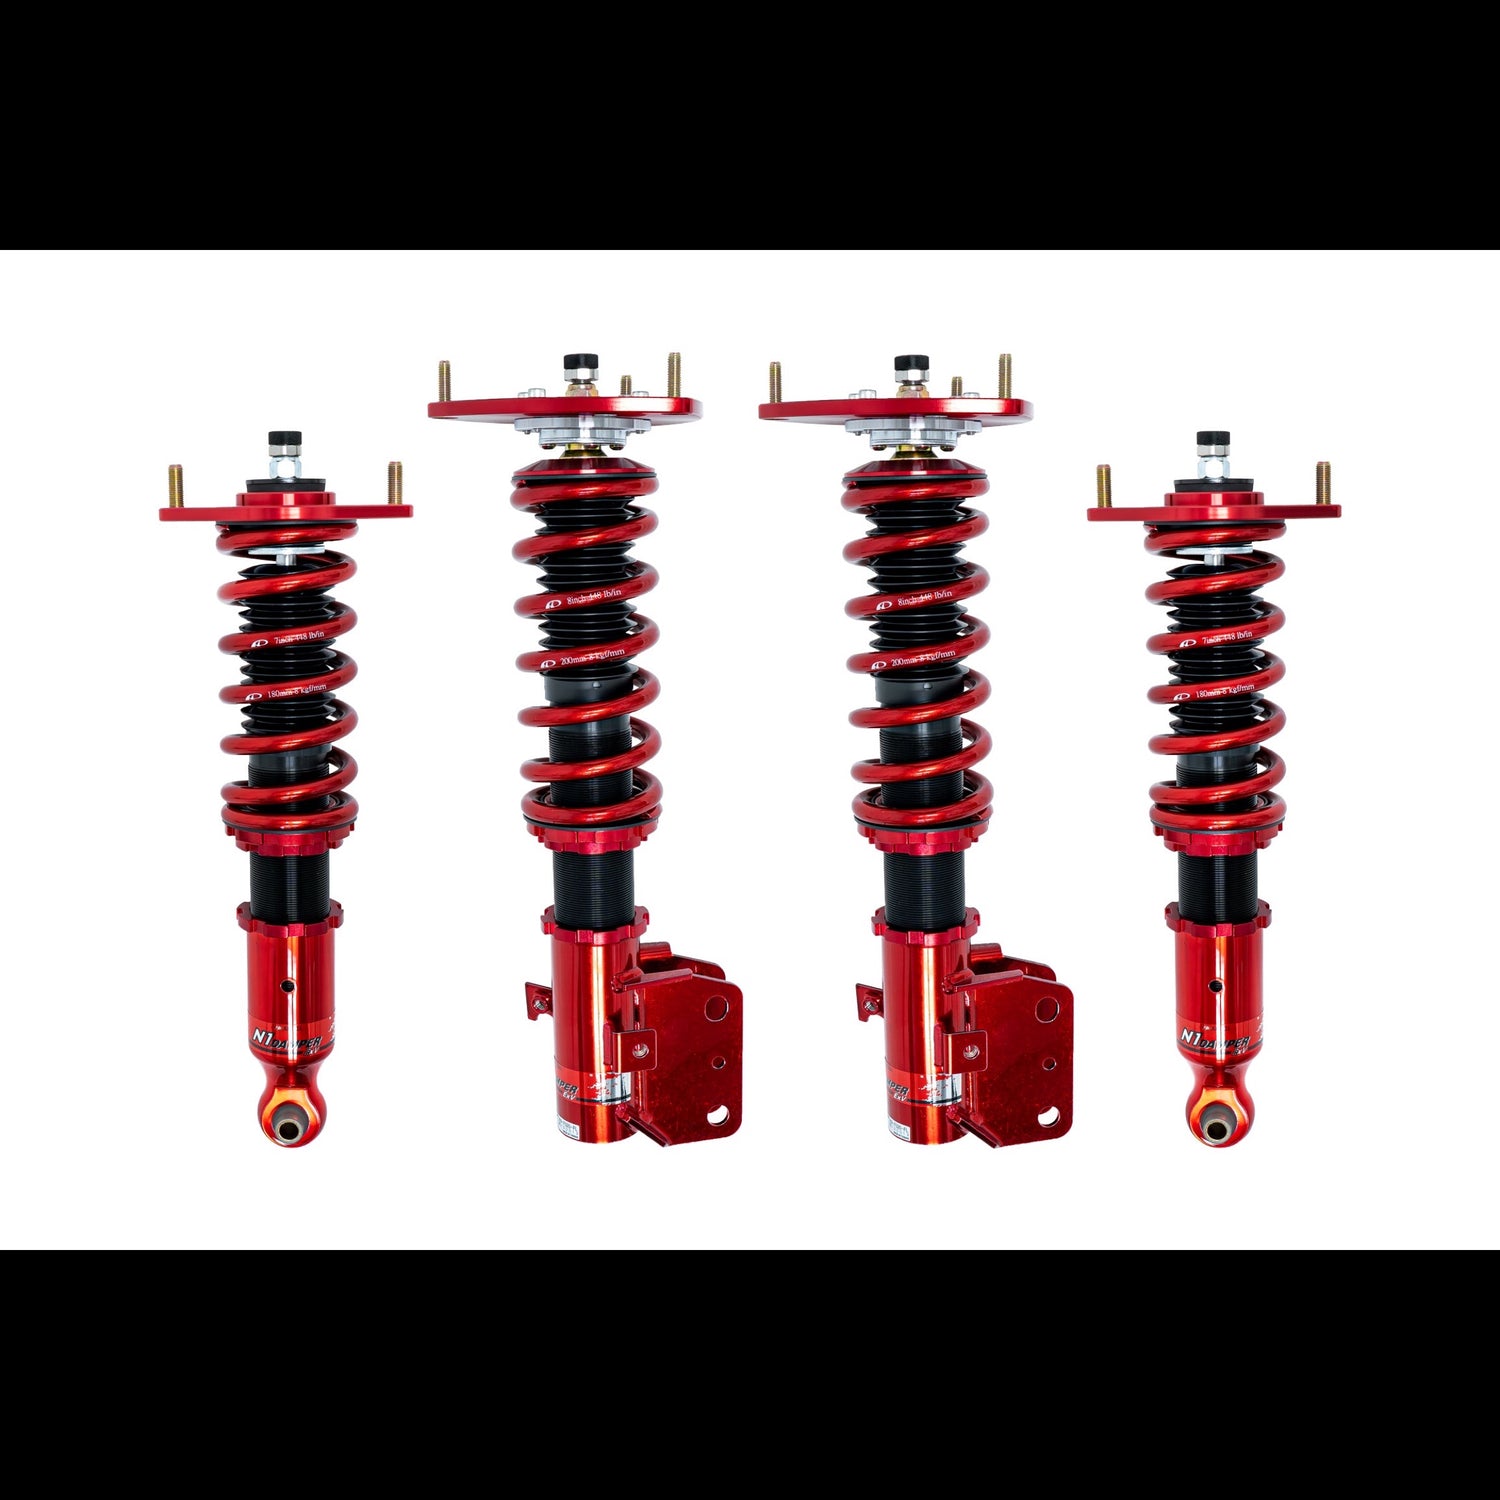 Toyota GR86 FRS BRZ Apexi coilover system in red